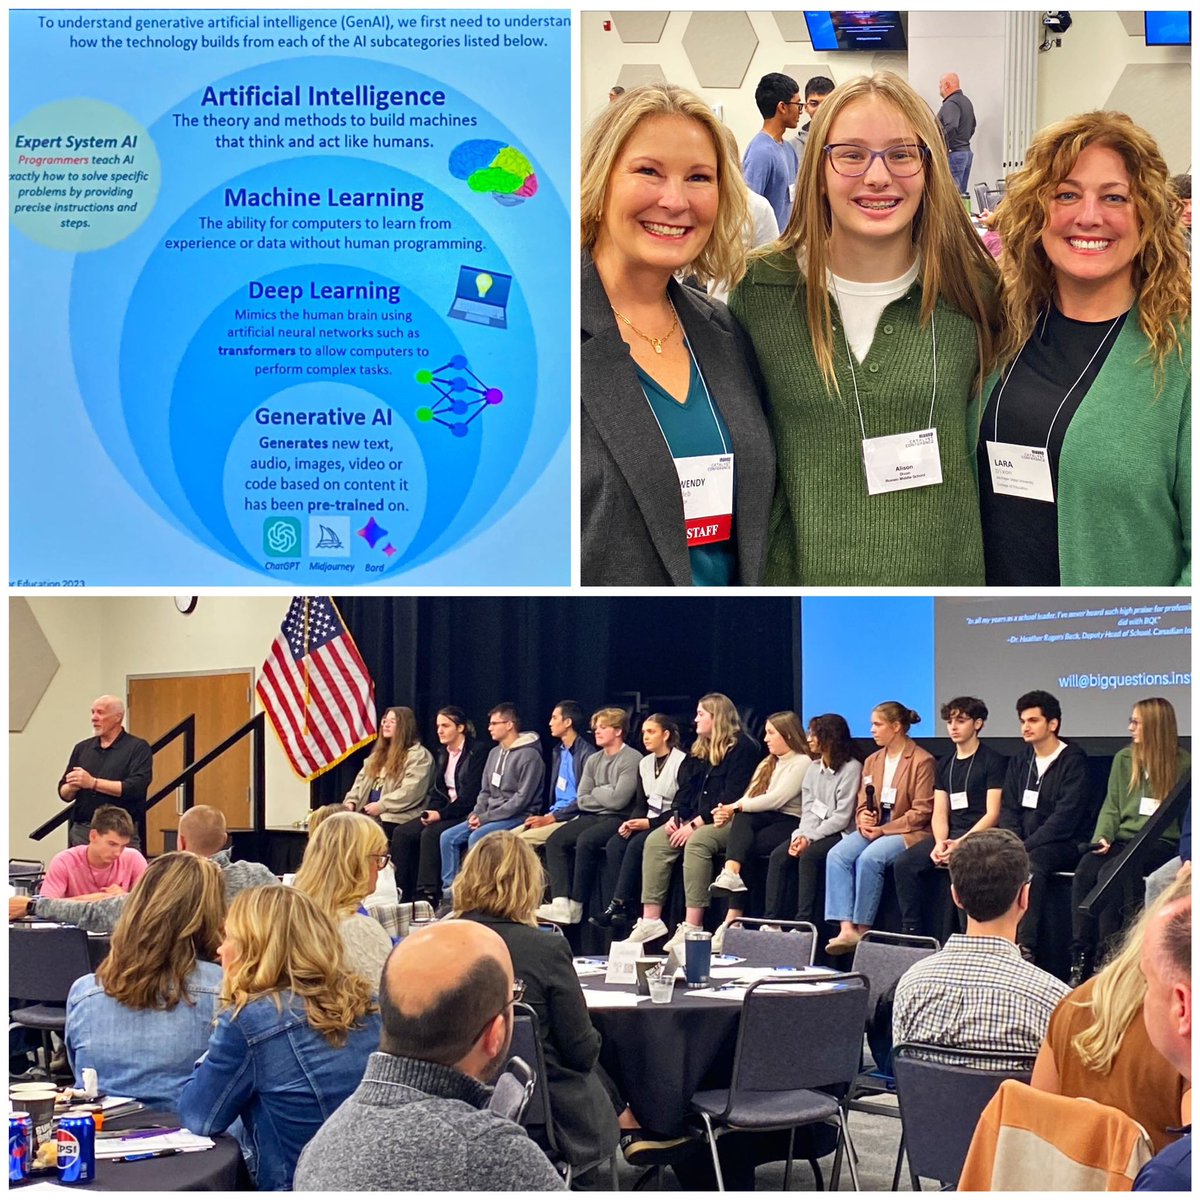 😃 2 share /w @MSUCollegeofEd @michiganstateu faculty & students 2day’s GenerativeAI learning @massp #Catalyst23 💚🤍 Incredible day /w educators & leaders across MI & the nation @WillRich @aiinedu @wendyzdeb #FutureForward & 🥰 that Ali was on the student panel #StudentAgency